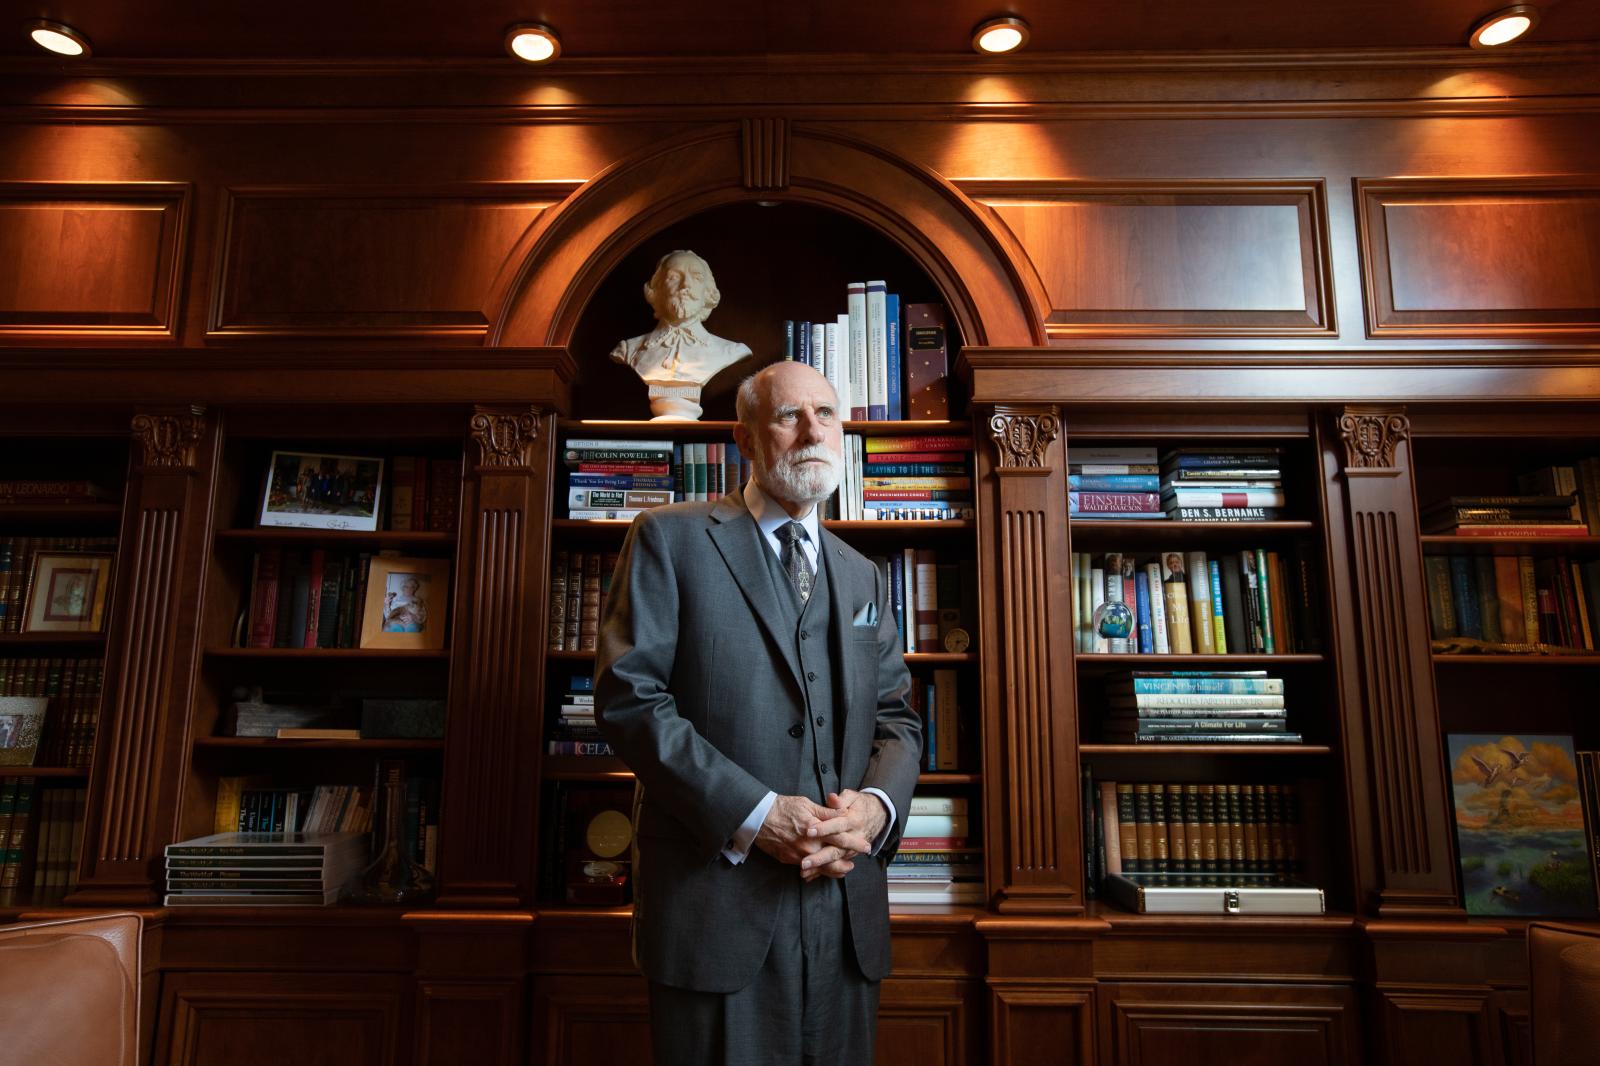 PORTRAITS - Vinton Cerf, one of the fathers of the internet, has also...